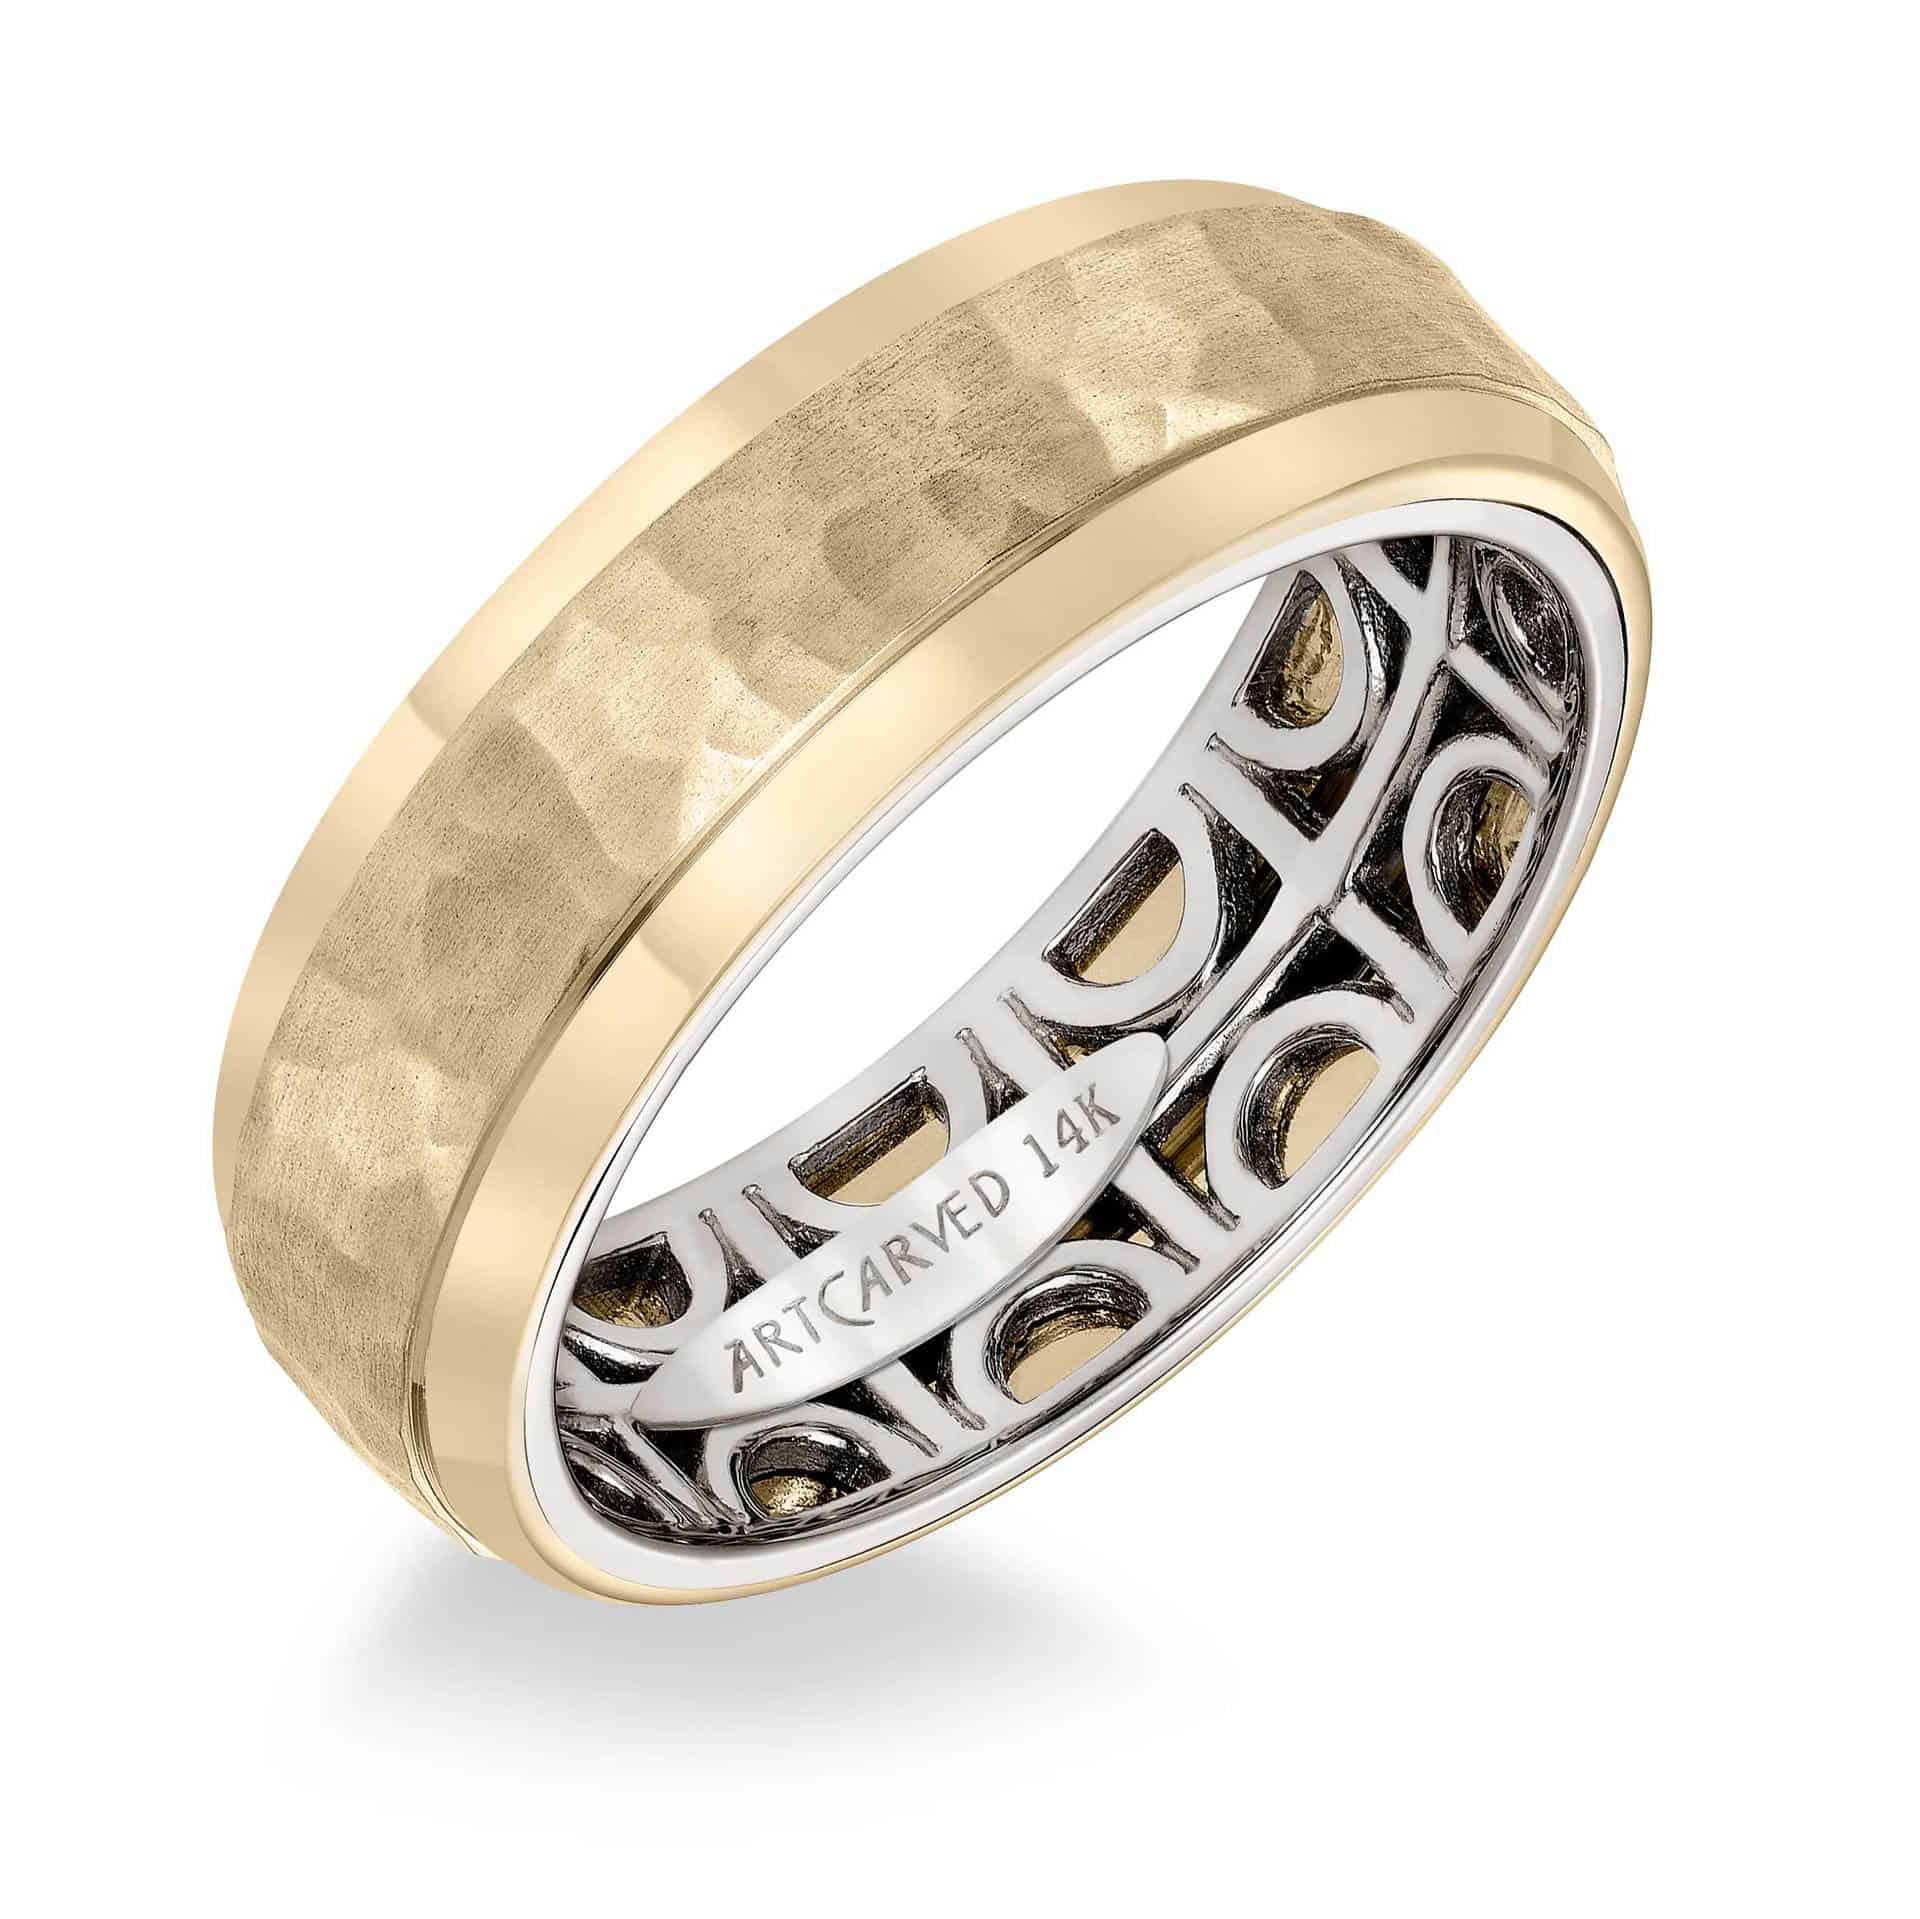 ArtCarved Men's Wedding Band with Geometric Pattern